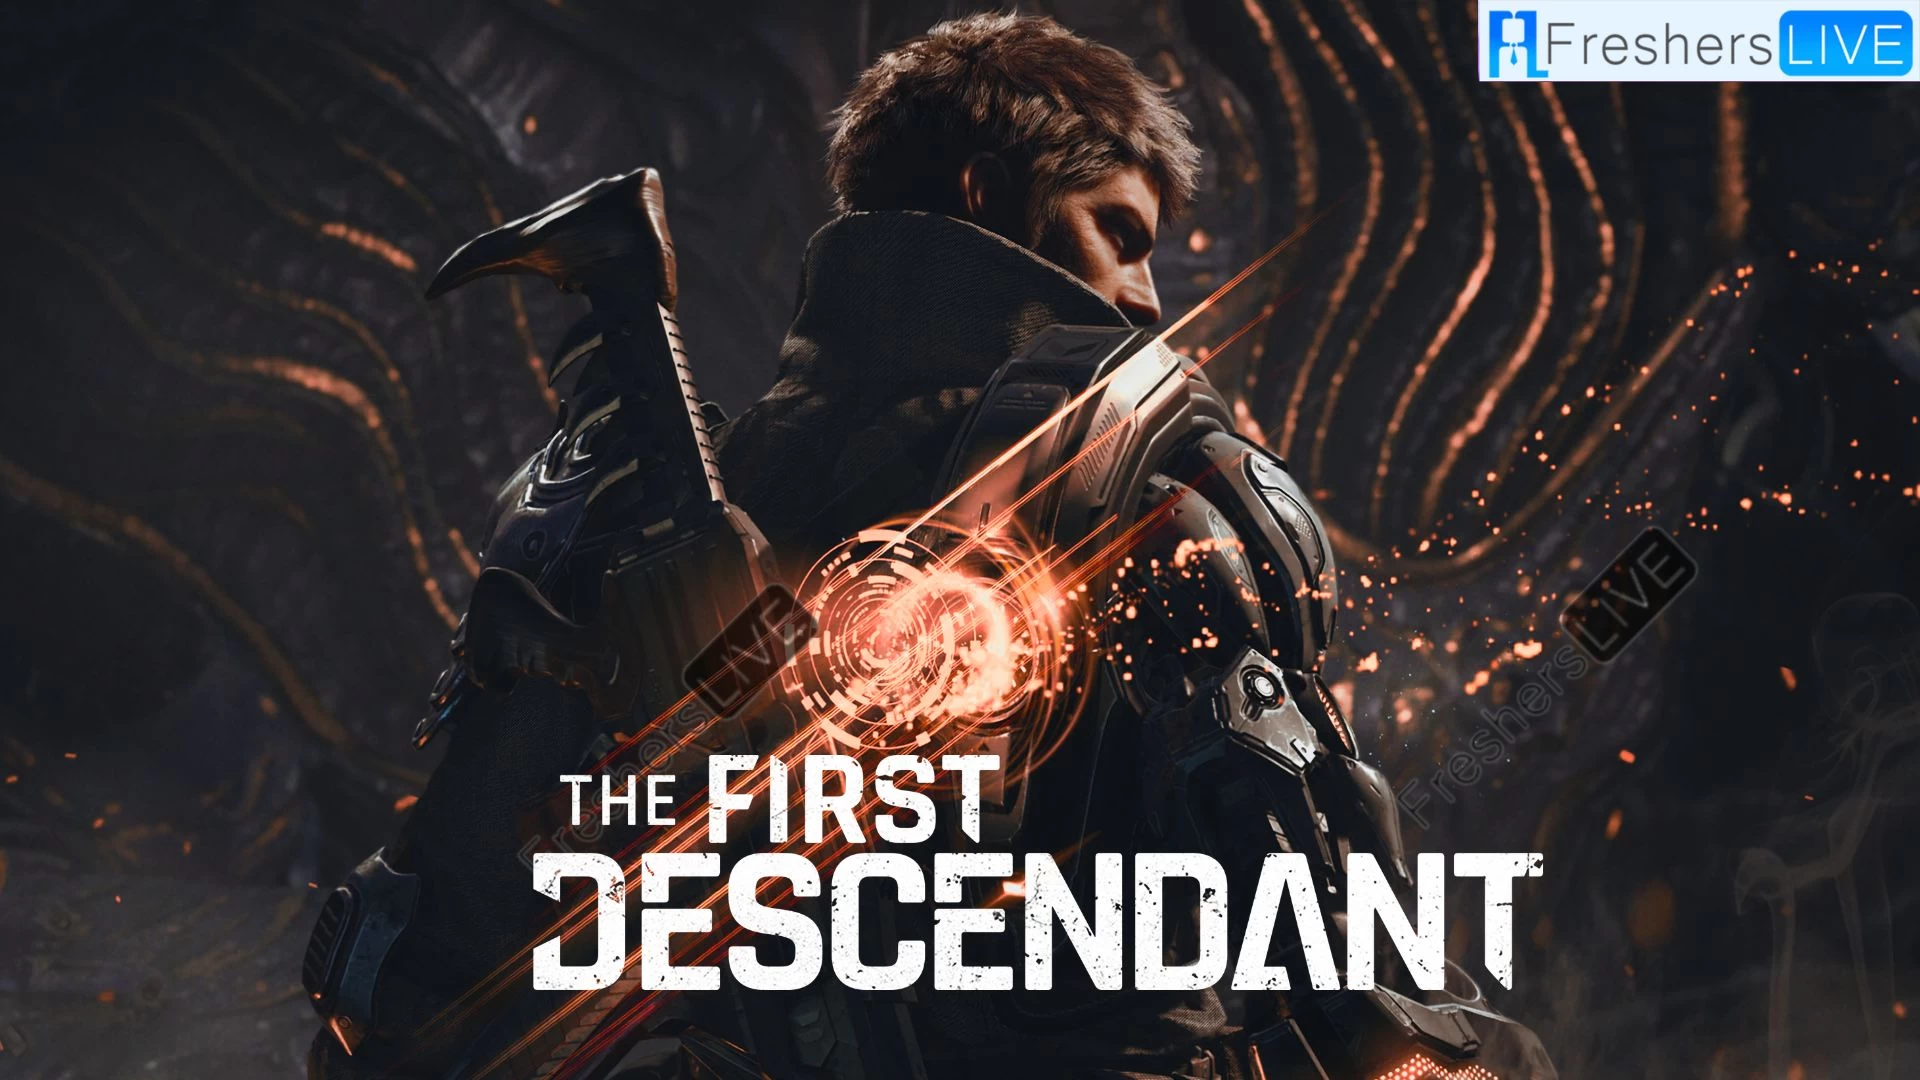 The First Descendant Beta Duration: When Does the First Descendant Beta End?